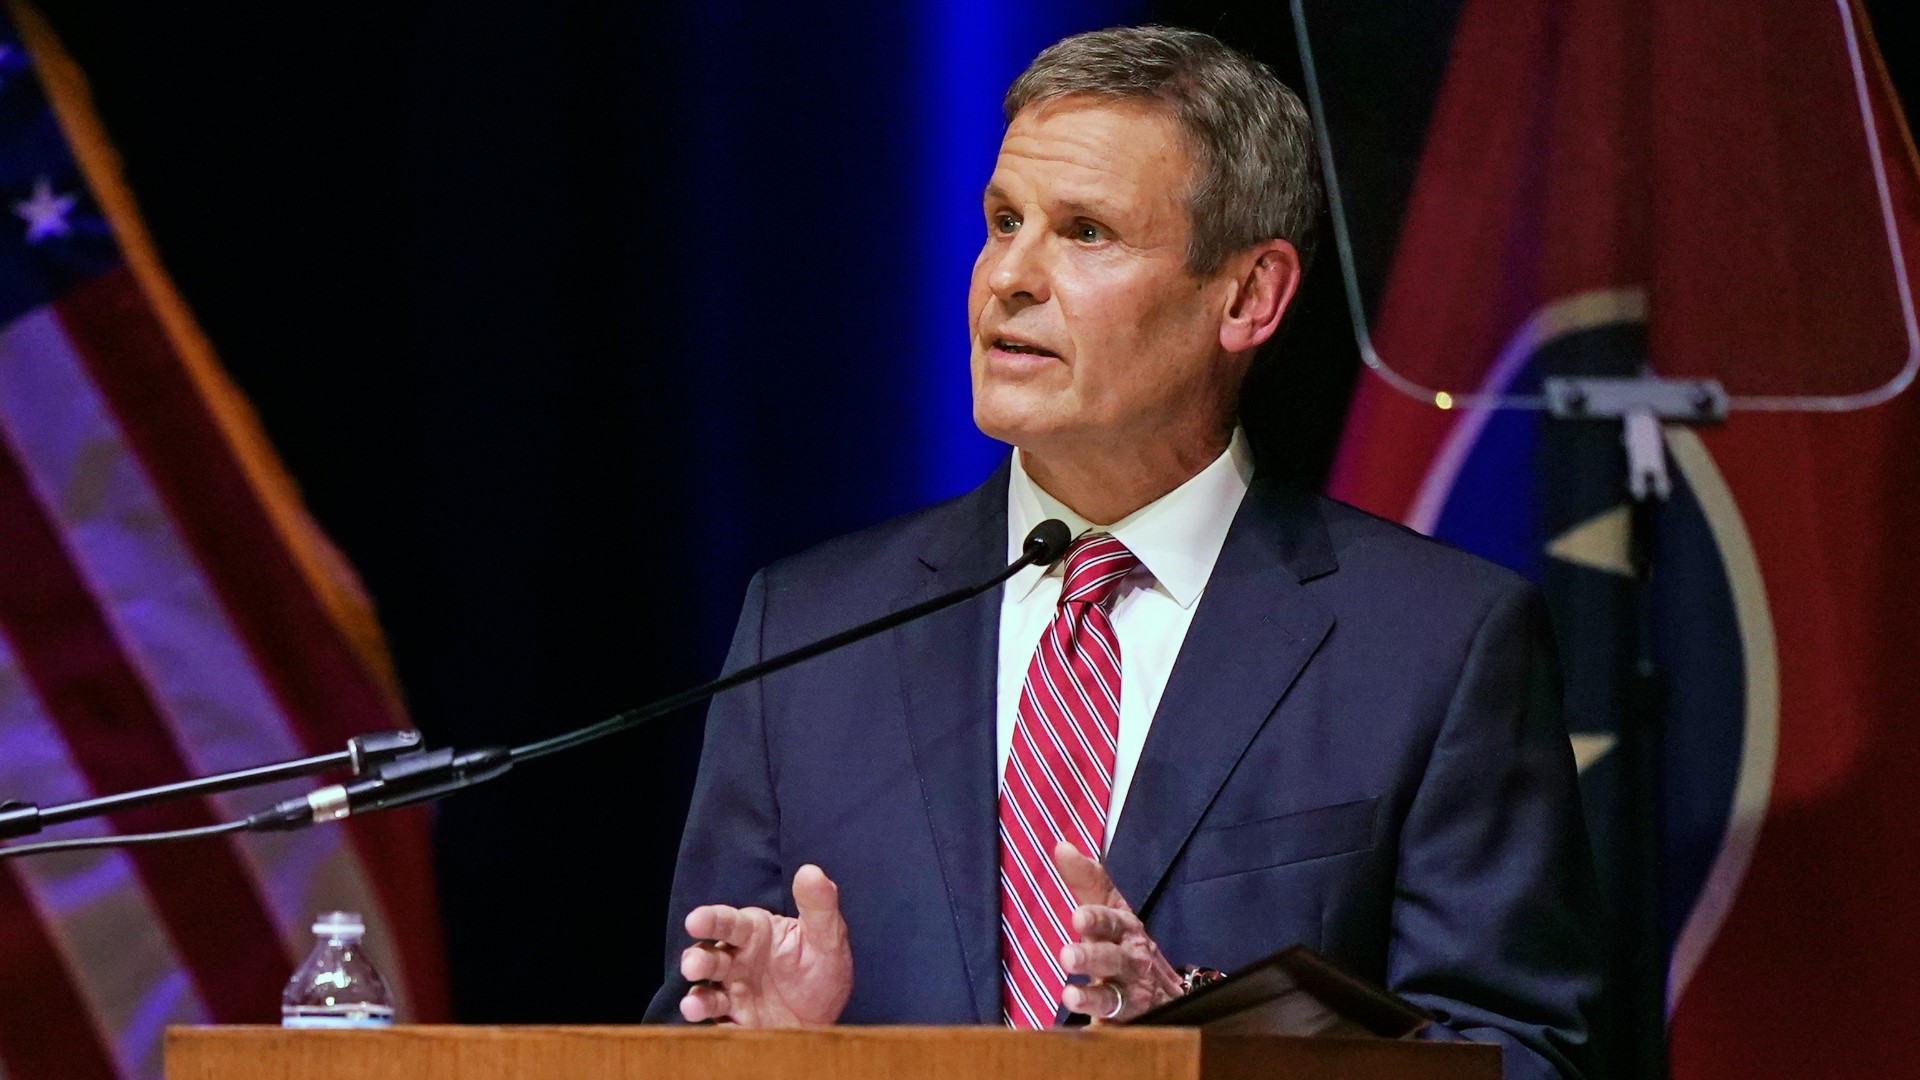 Gov. Bill Lee says the state hasn't approved any school vouchers for families seeking public funds to cover private school expenses as the new school year starts.